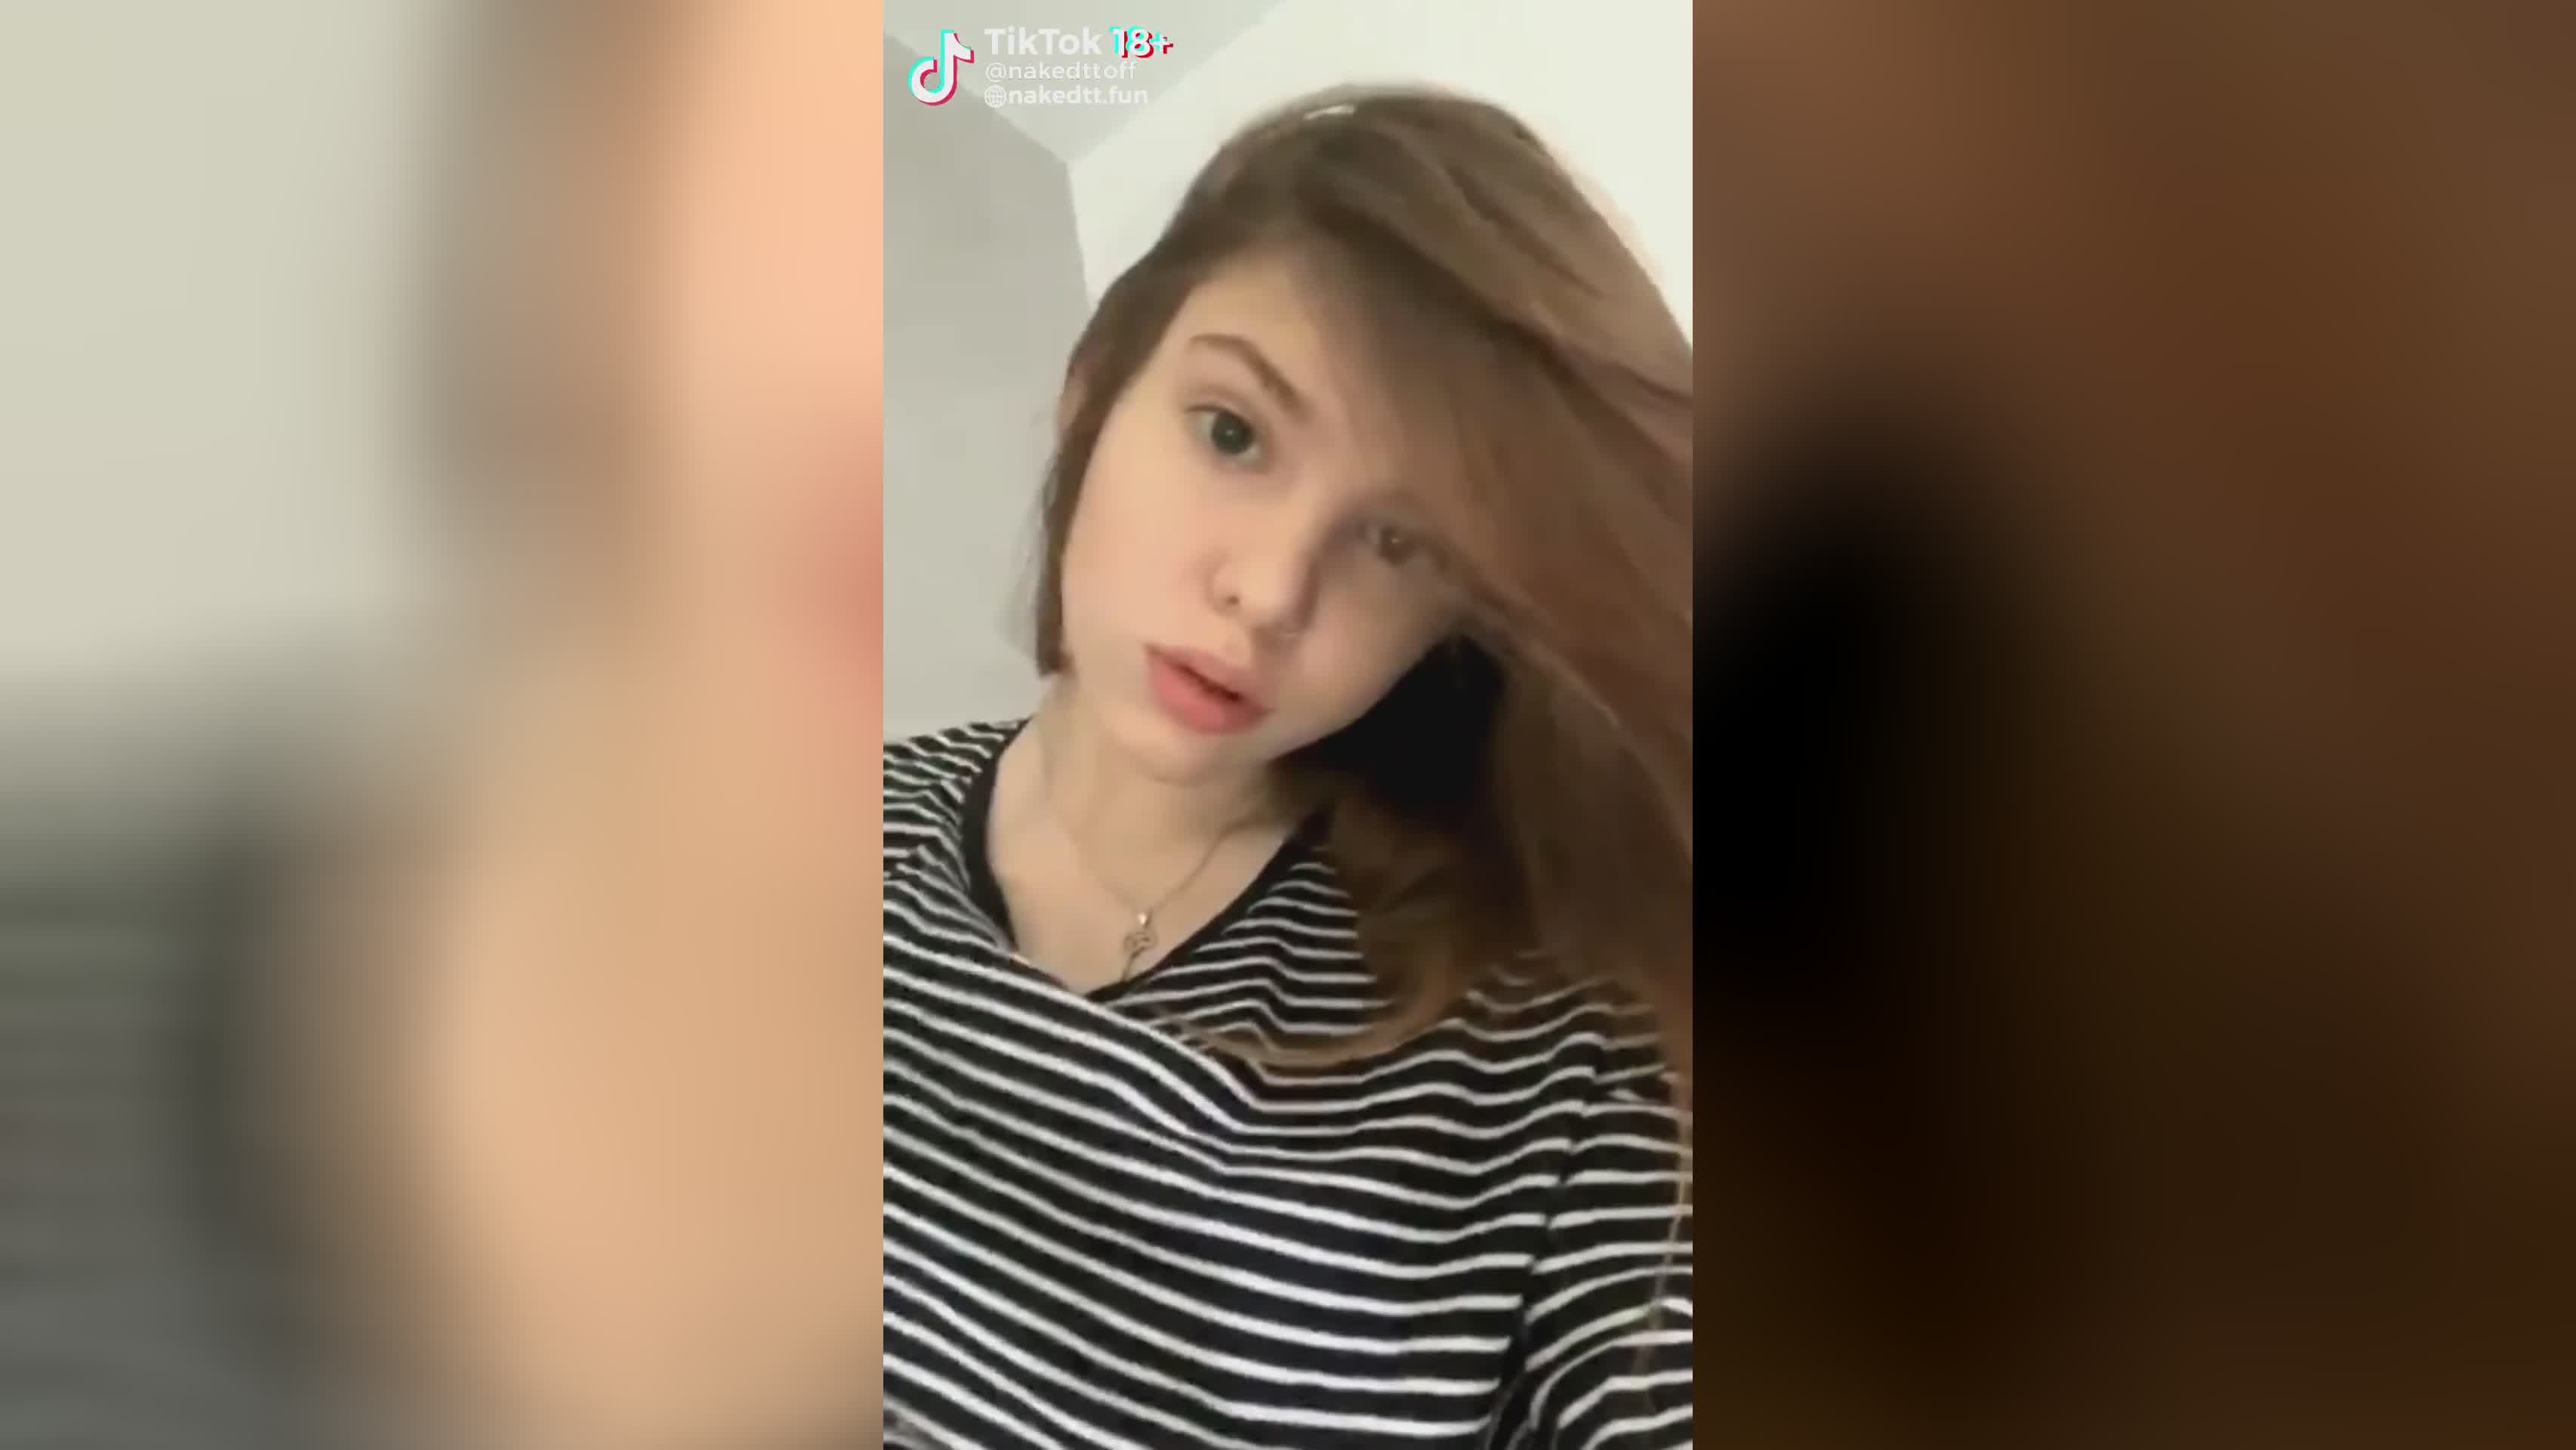 Nude tiktok girl showing off unreal cute tits